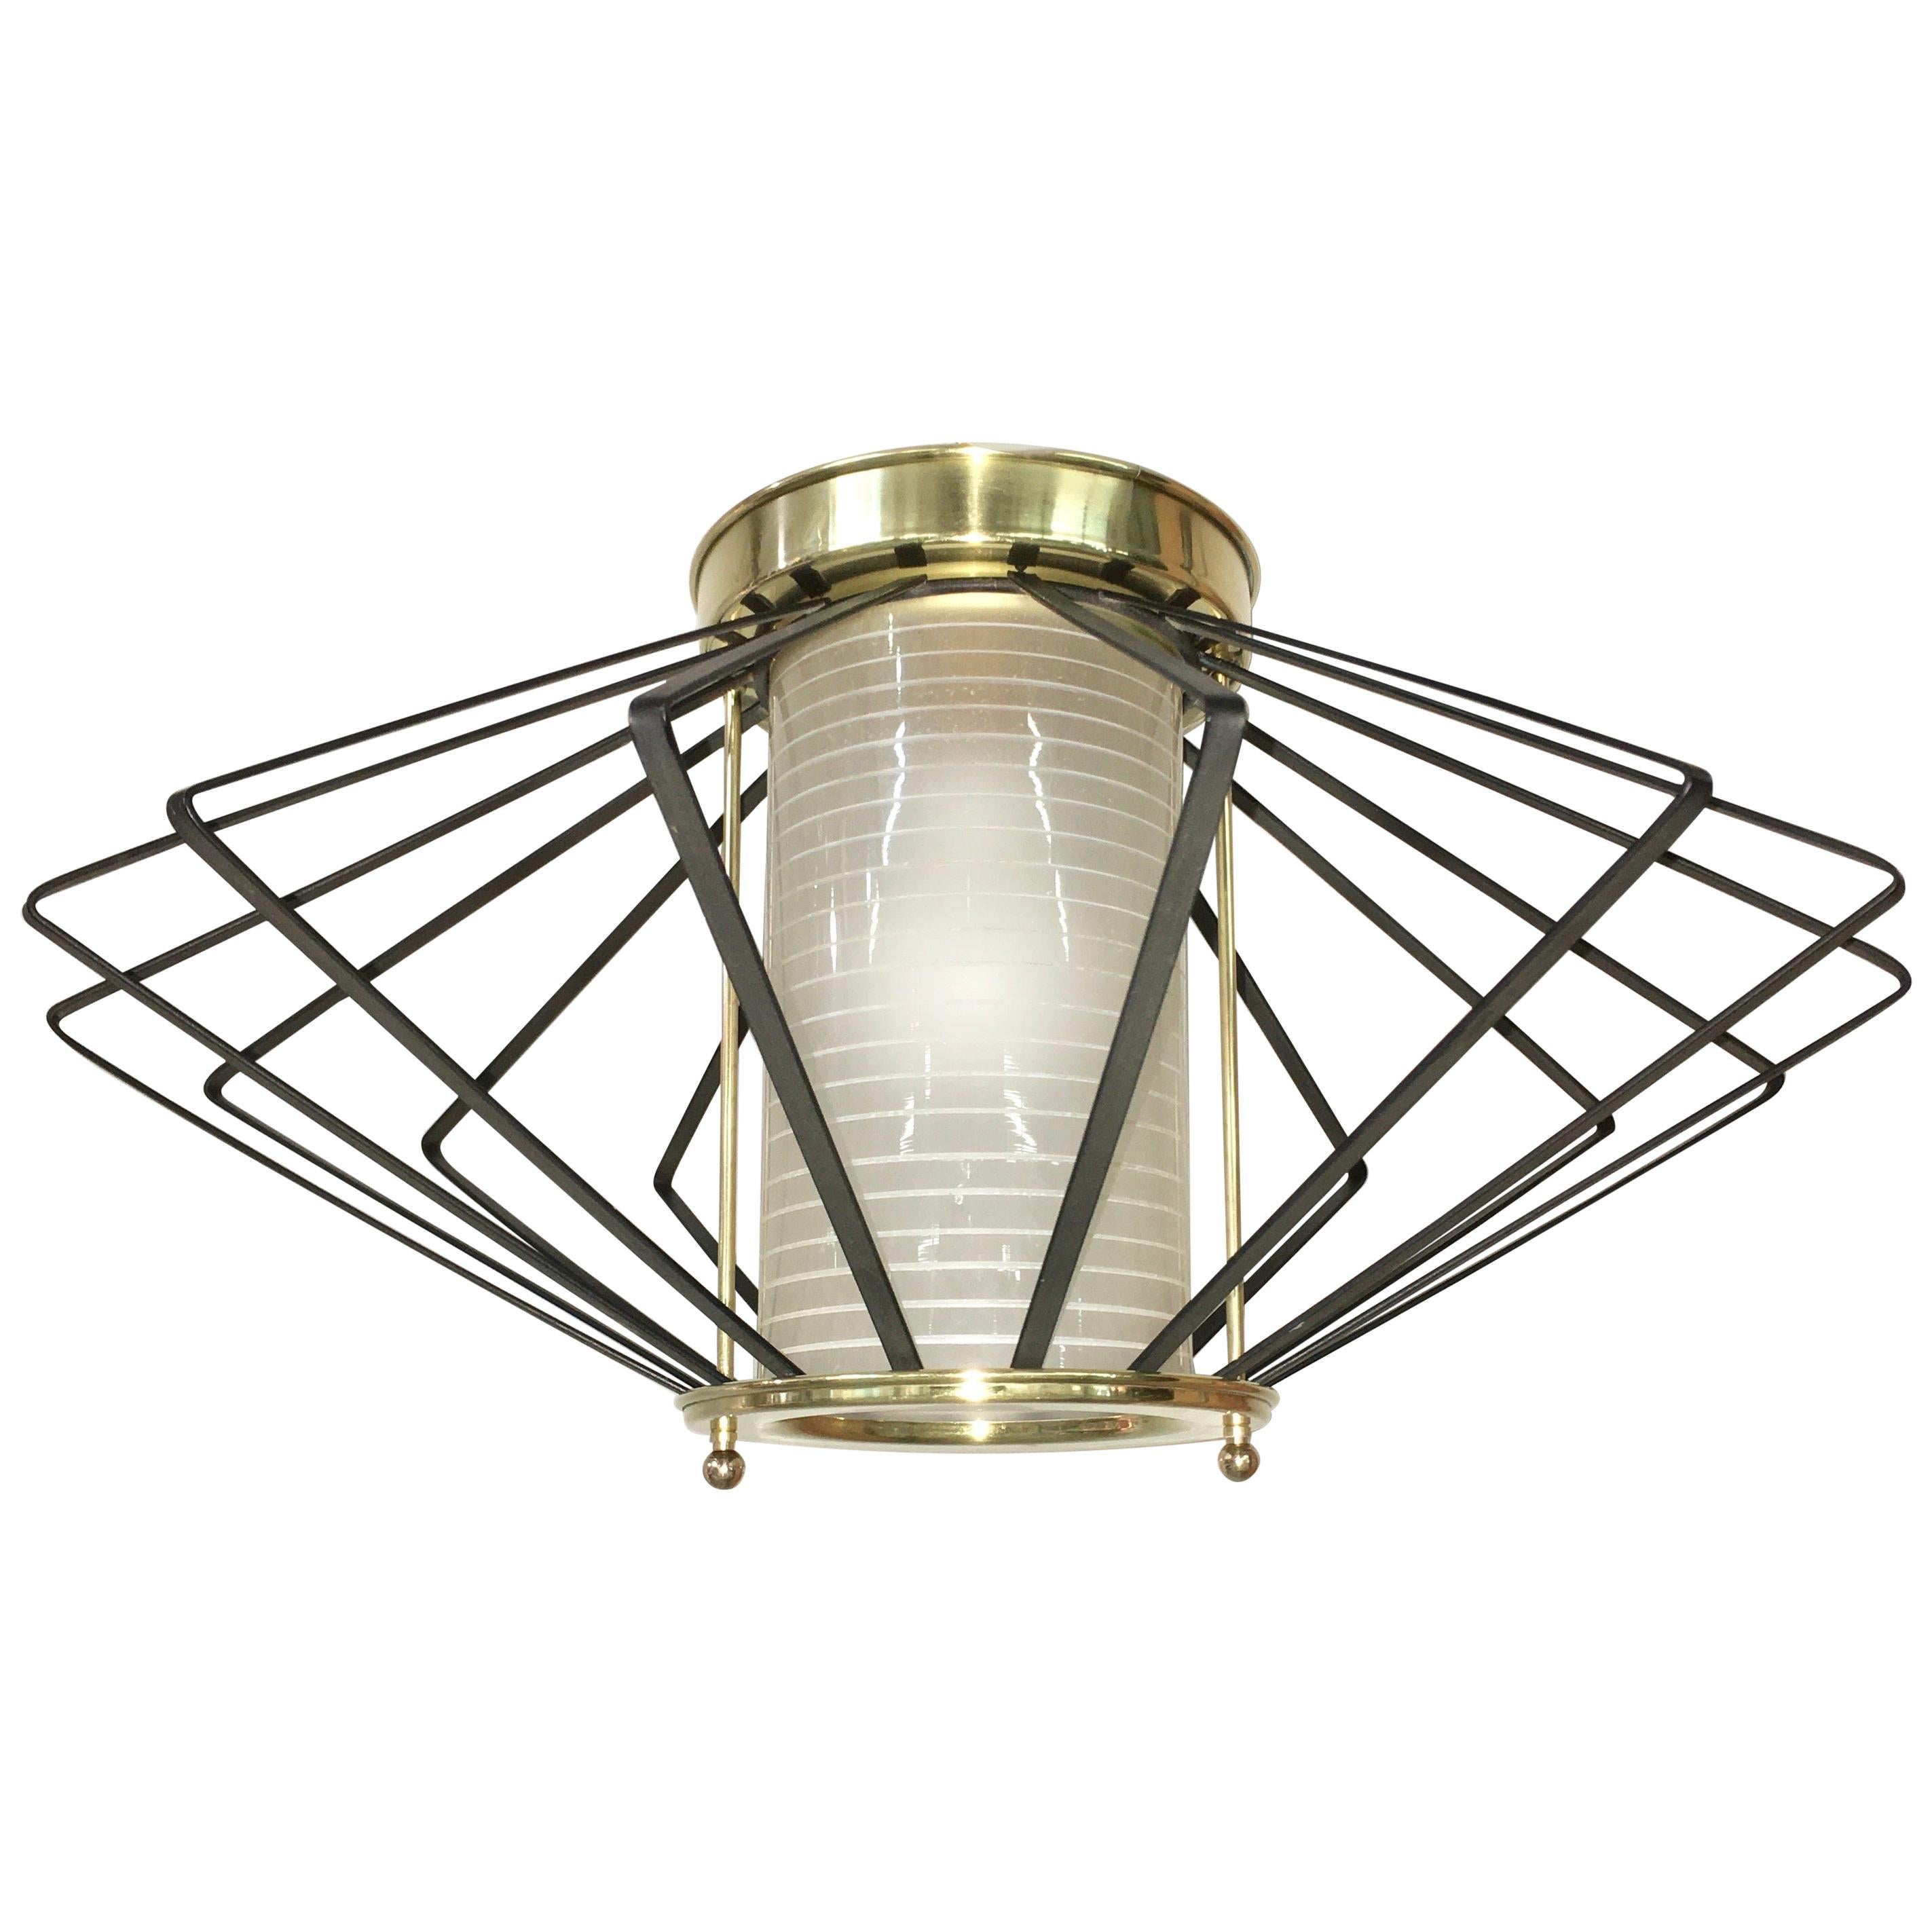 Atomic Ceiling Mounted Light Fixtures